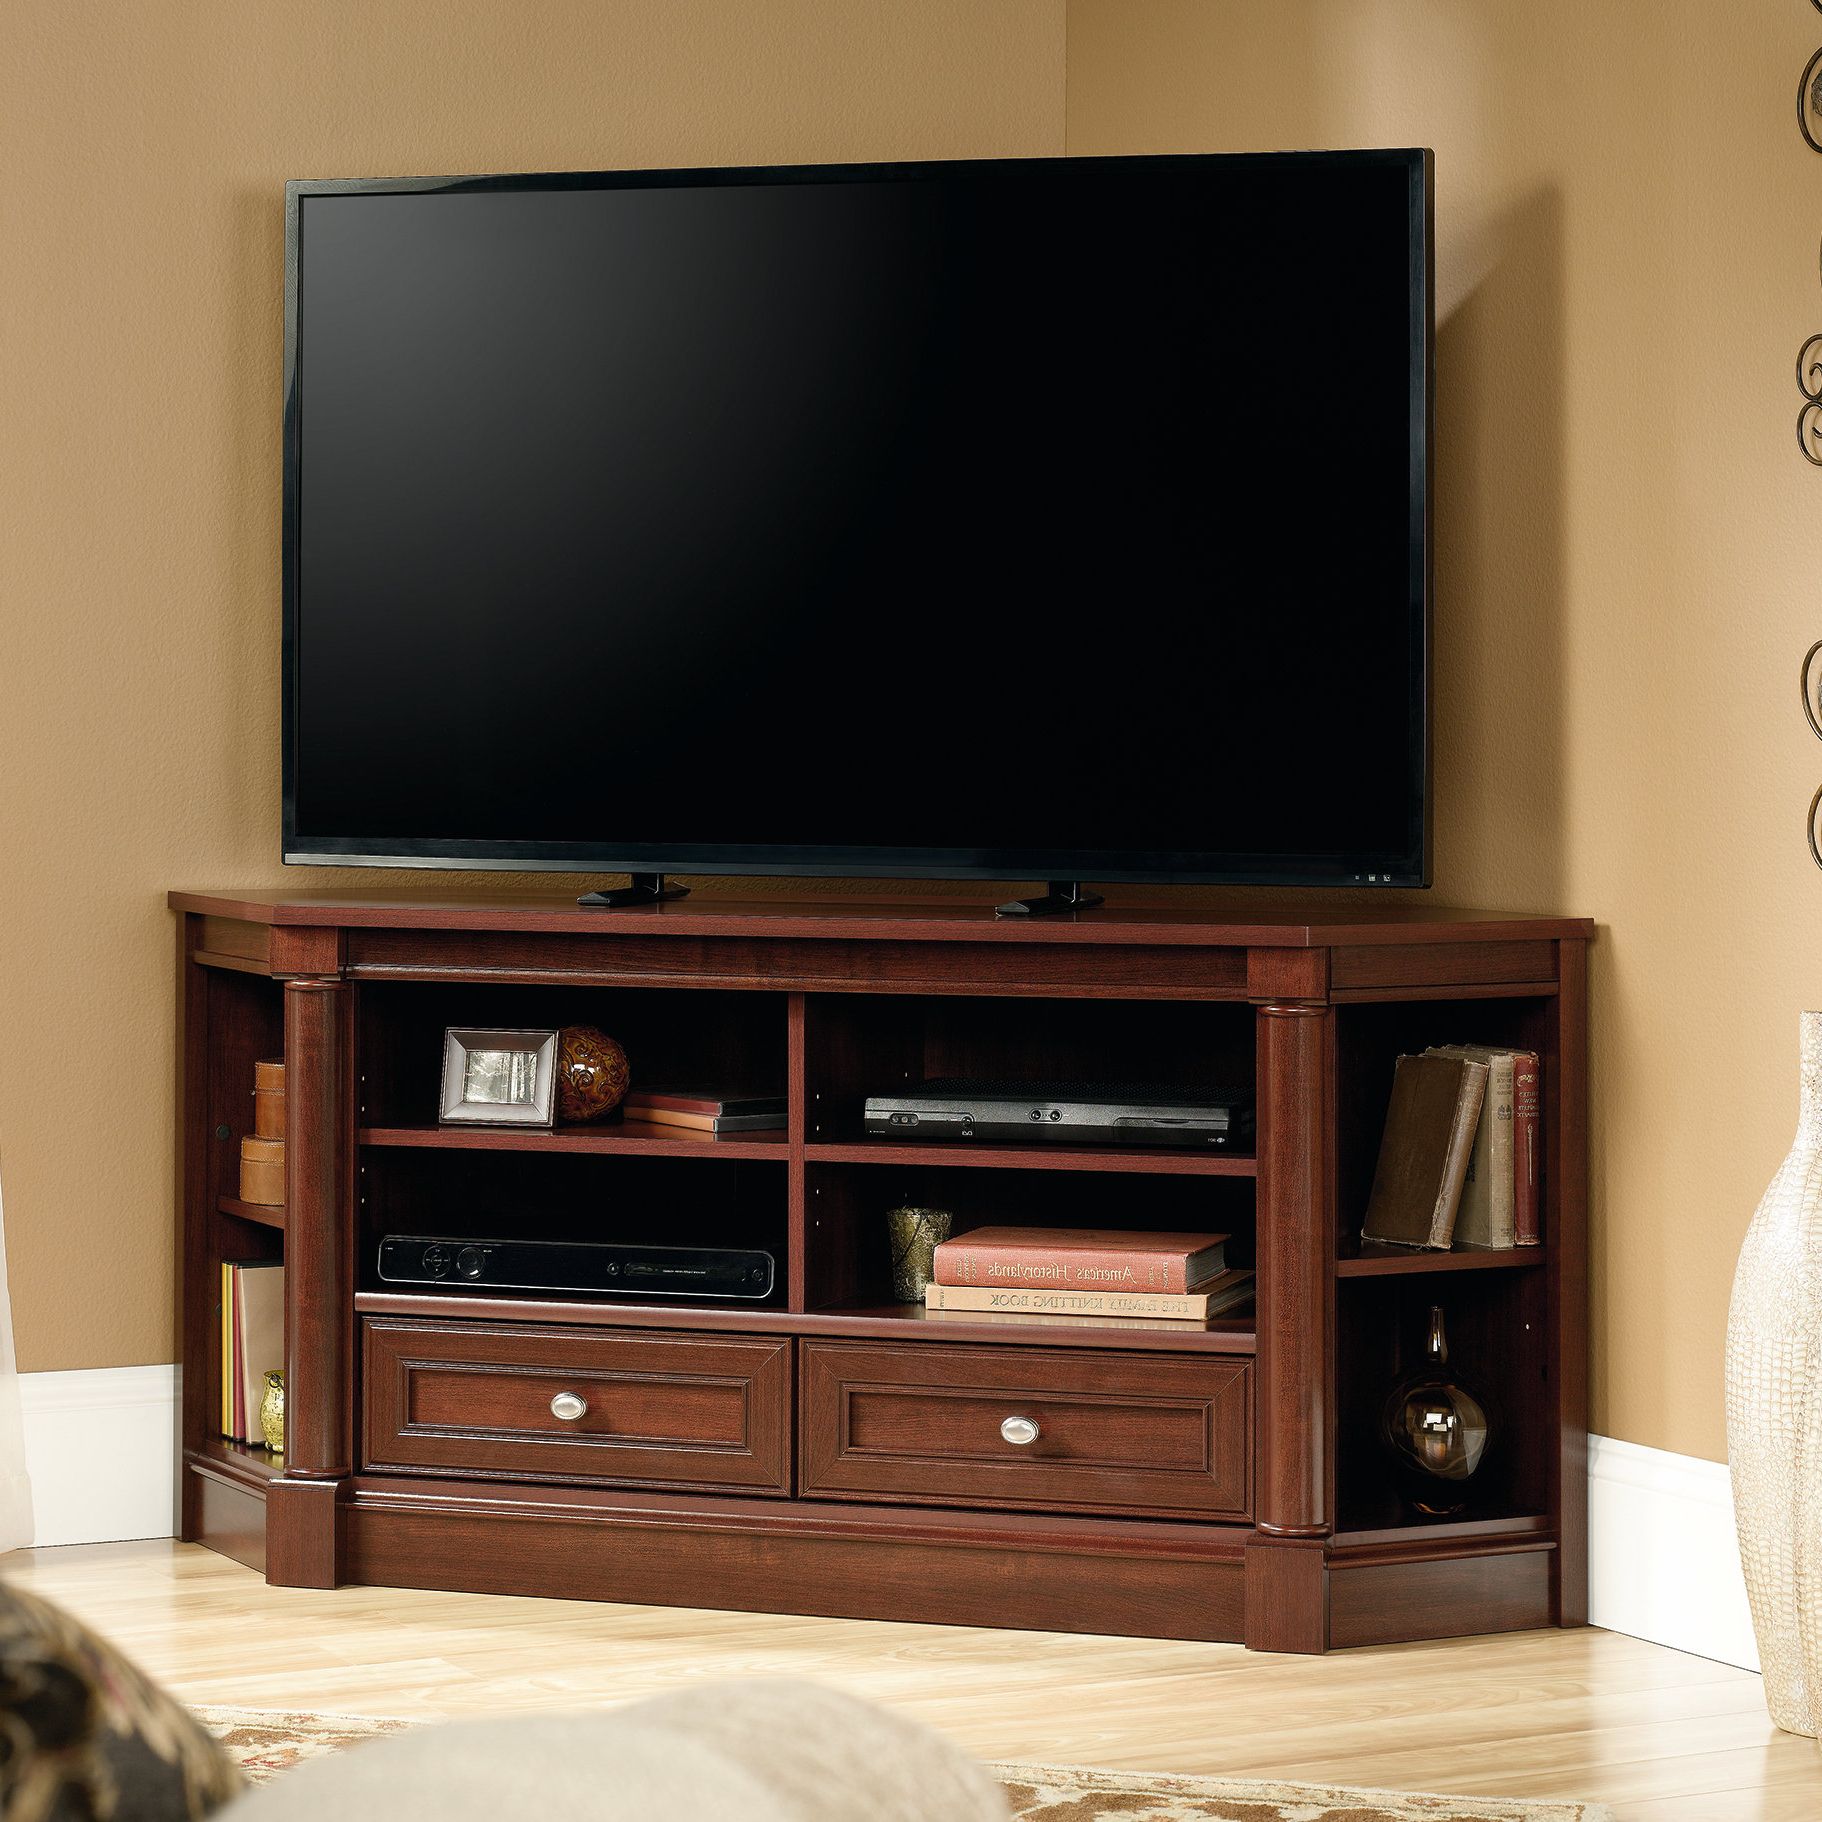 Cornet Tv Stands With Regard To Most Up To Date 55 In Corner Tv Stand (View 16 of 20)